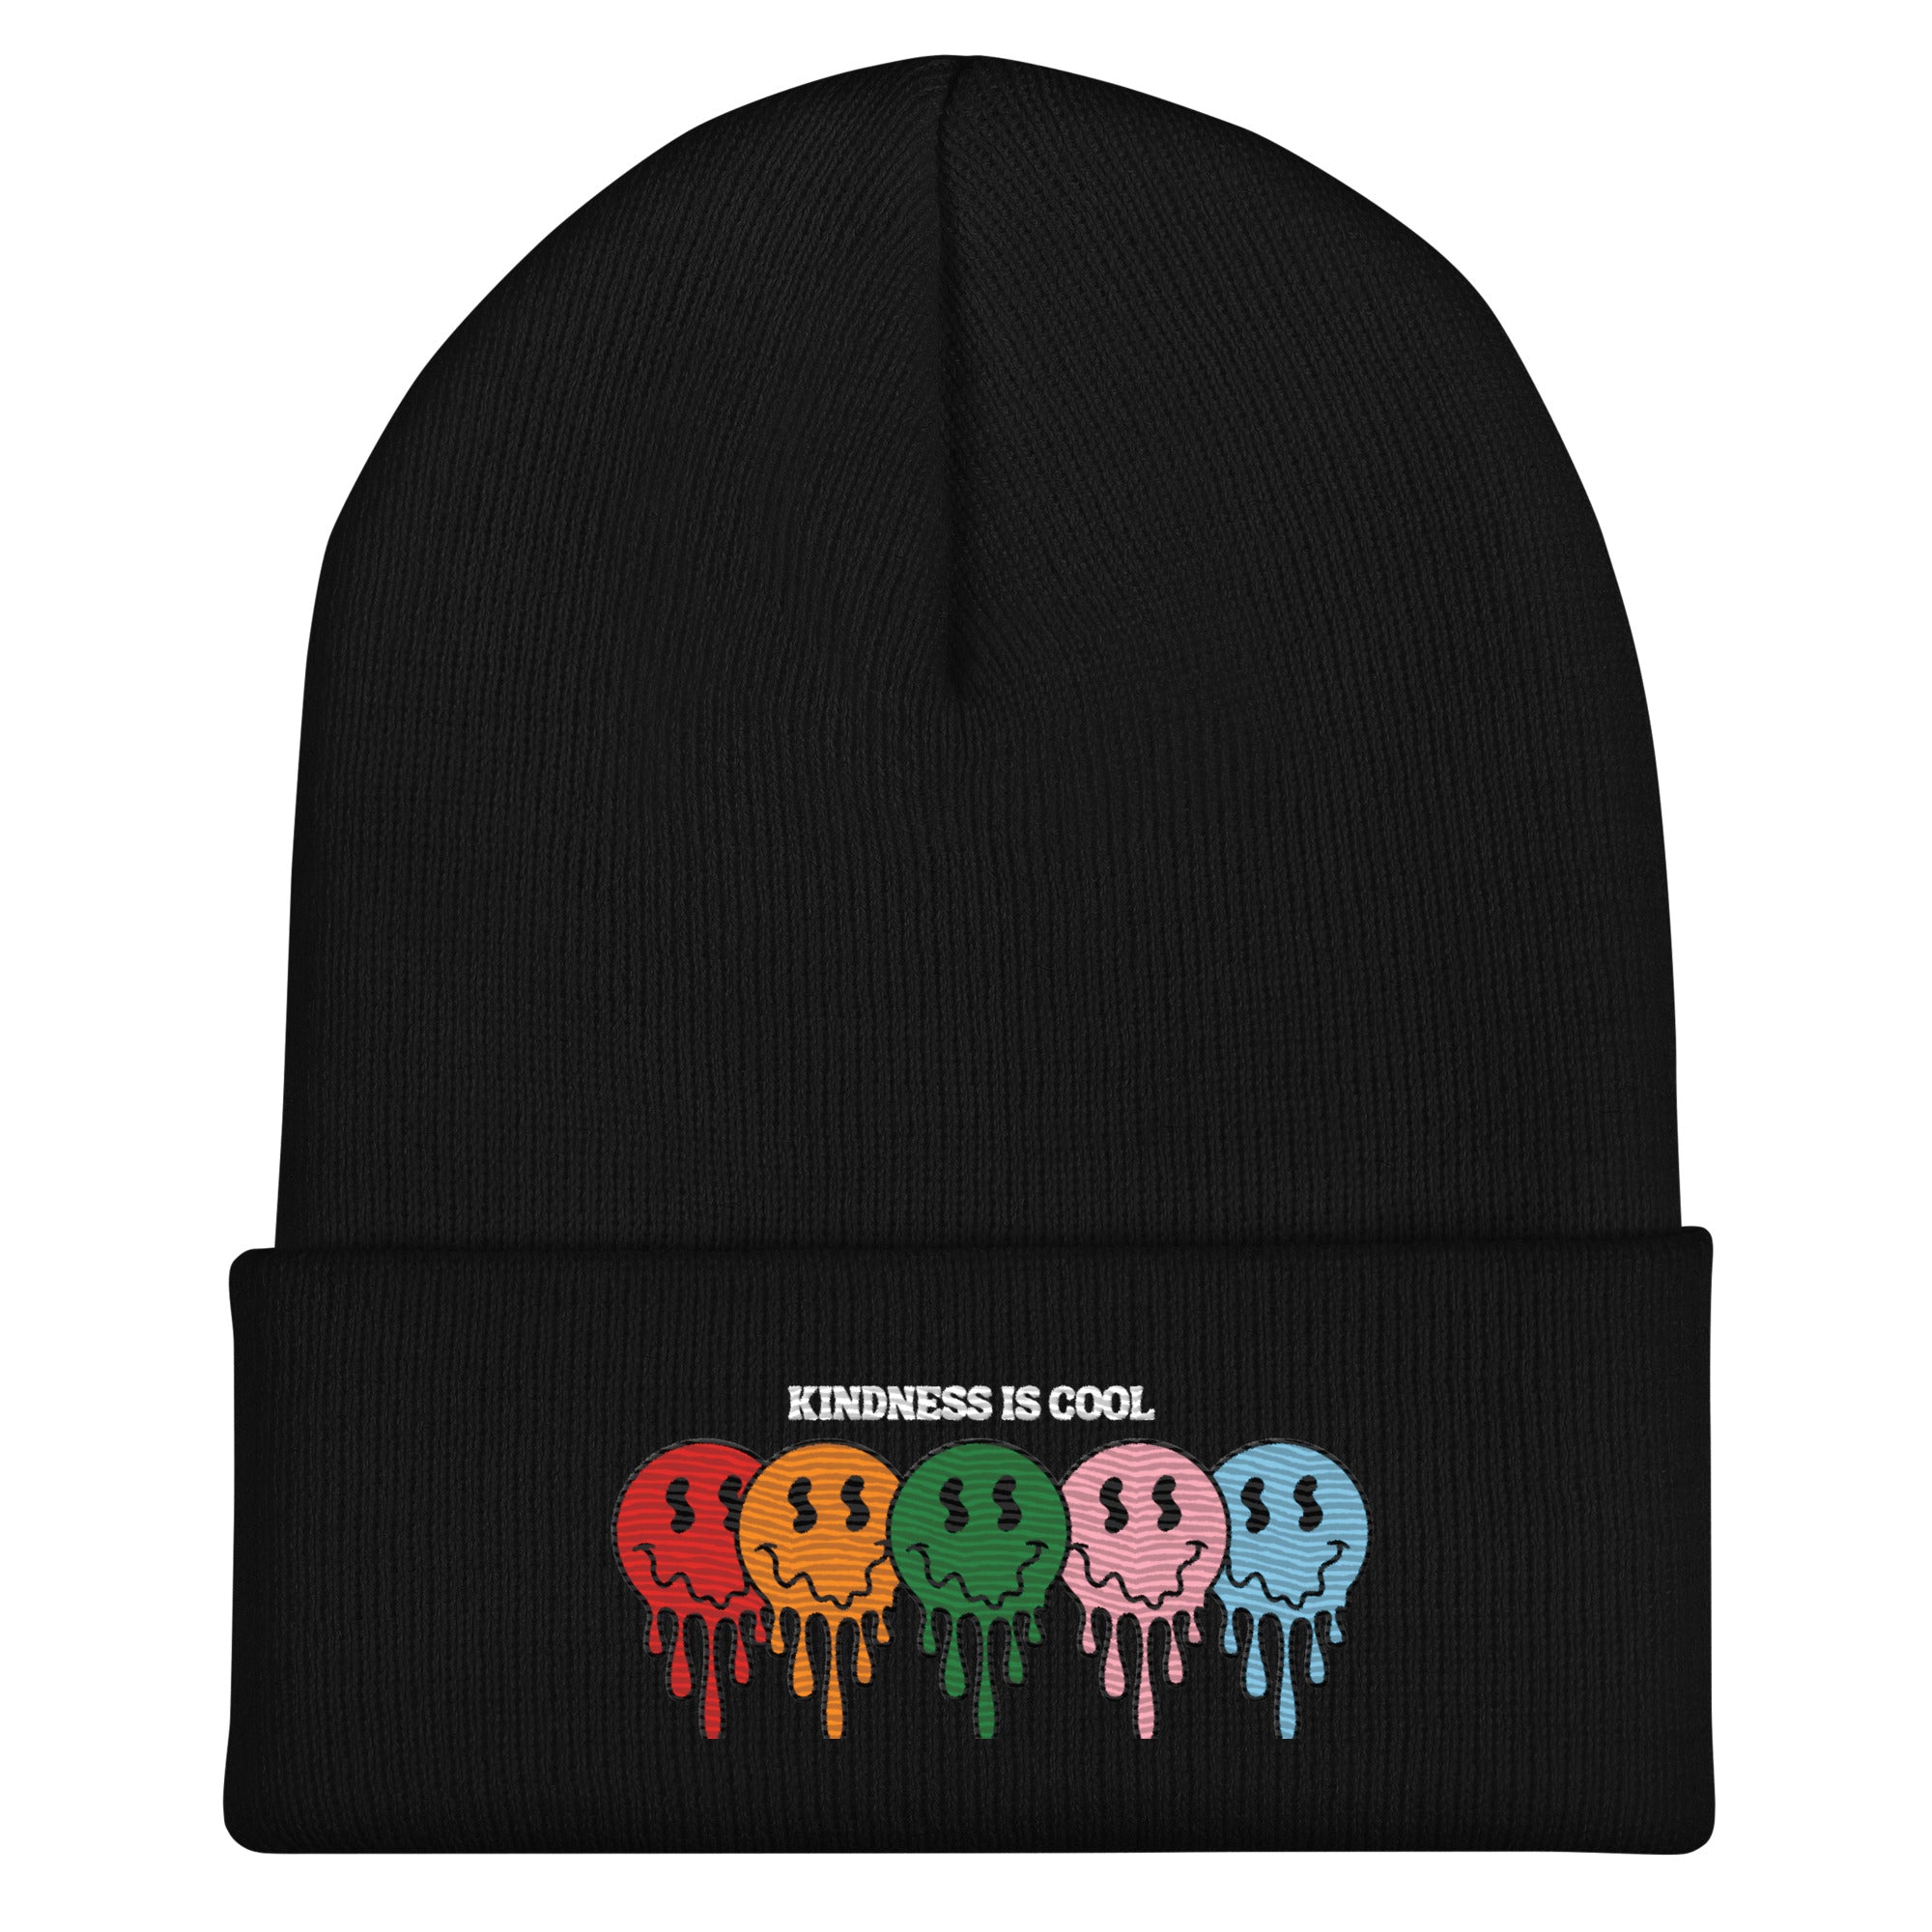 Kindness Is Cool Cuffed Beanie